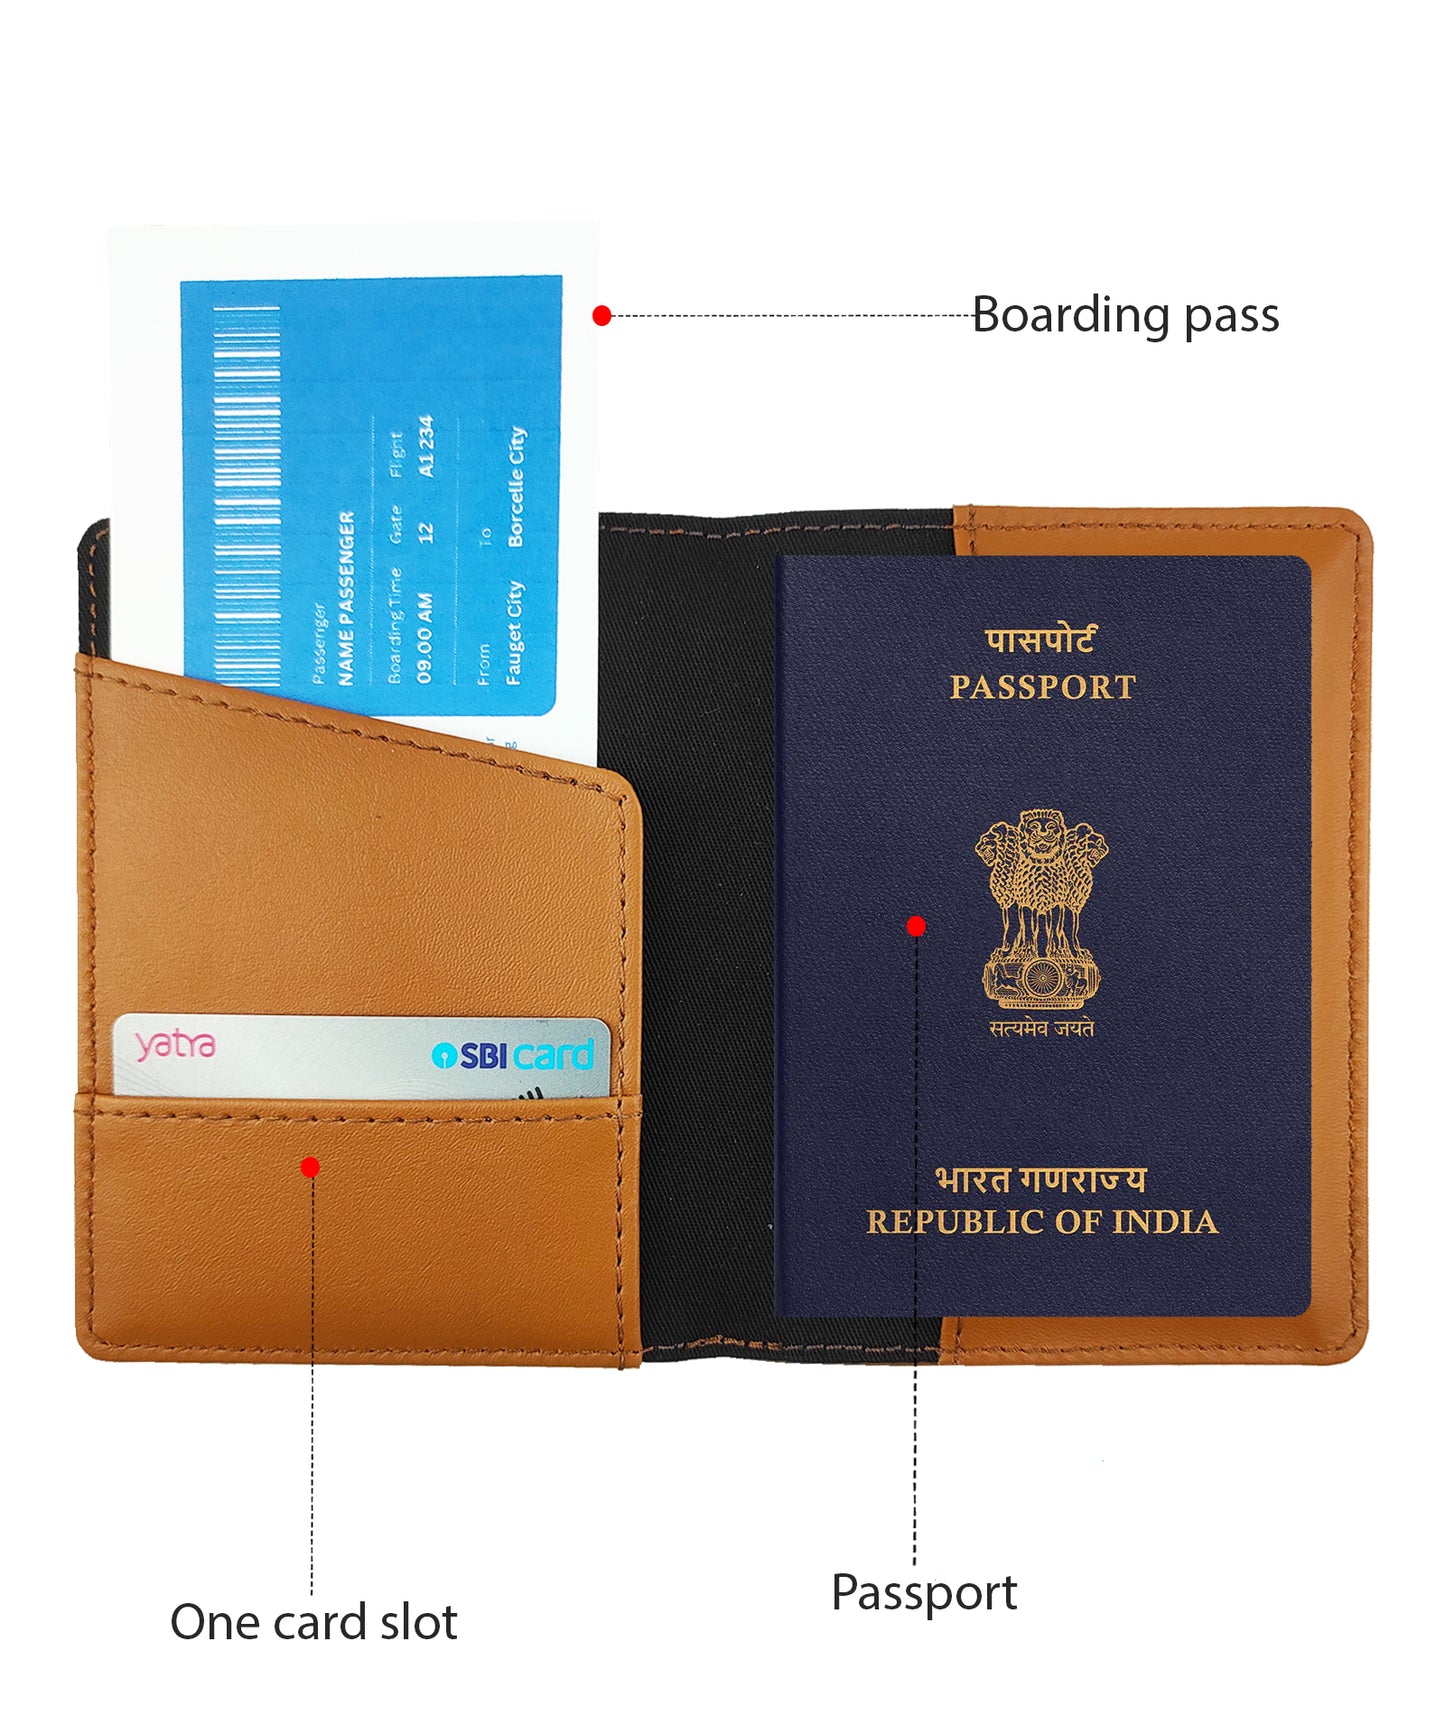 Multicolor printed Leatherette Passport Case with Luggage Tag